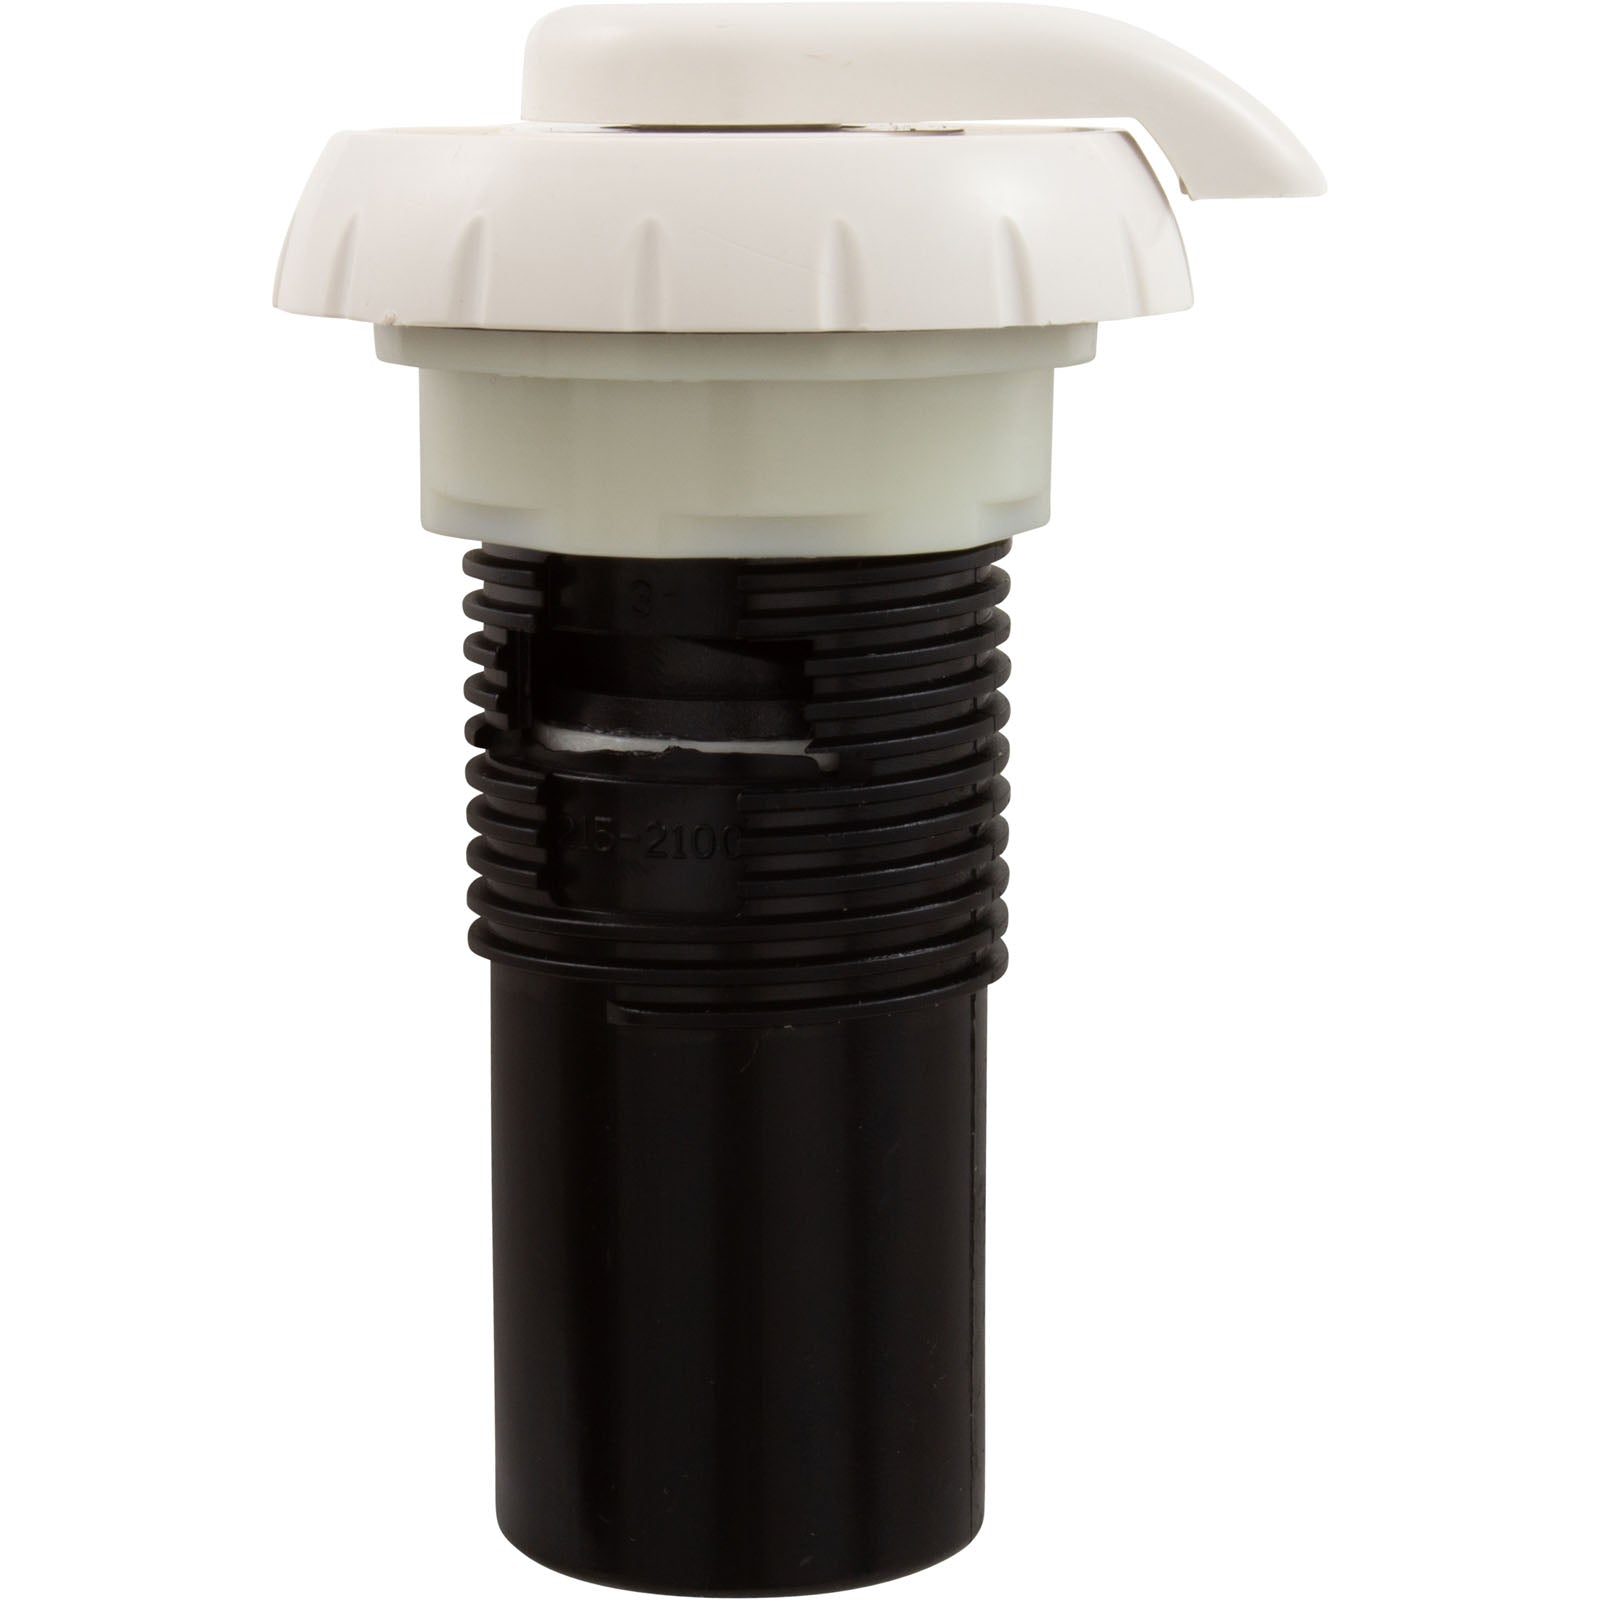 Waterway Air Control - 1" Top Access Notched Style, White (660-3570)